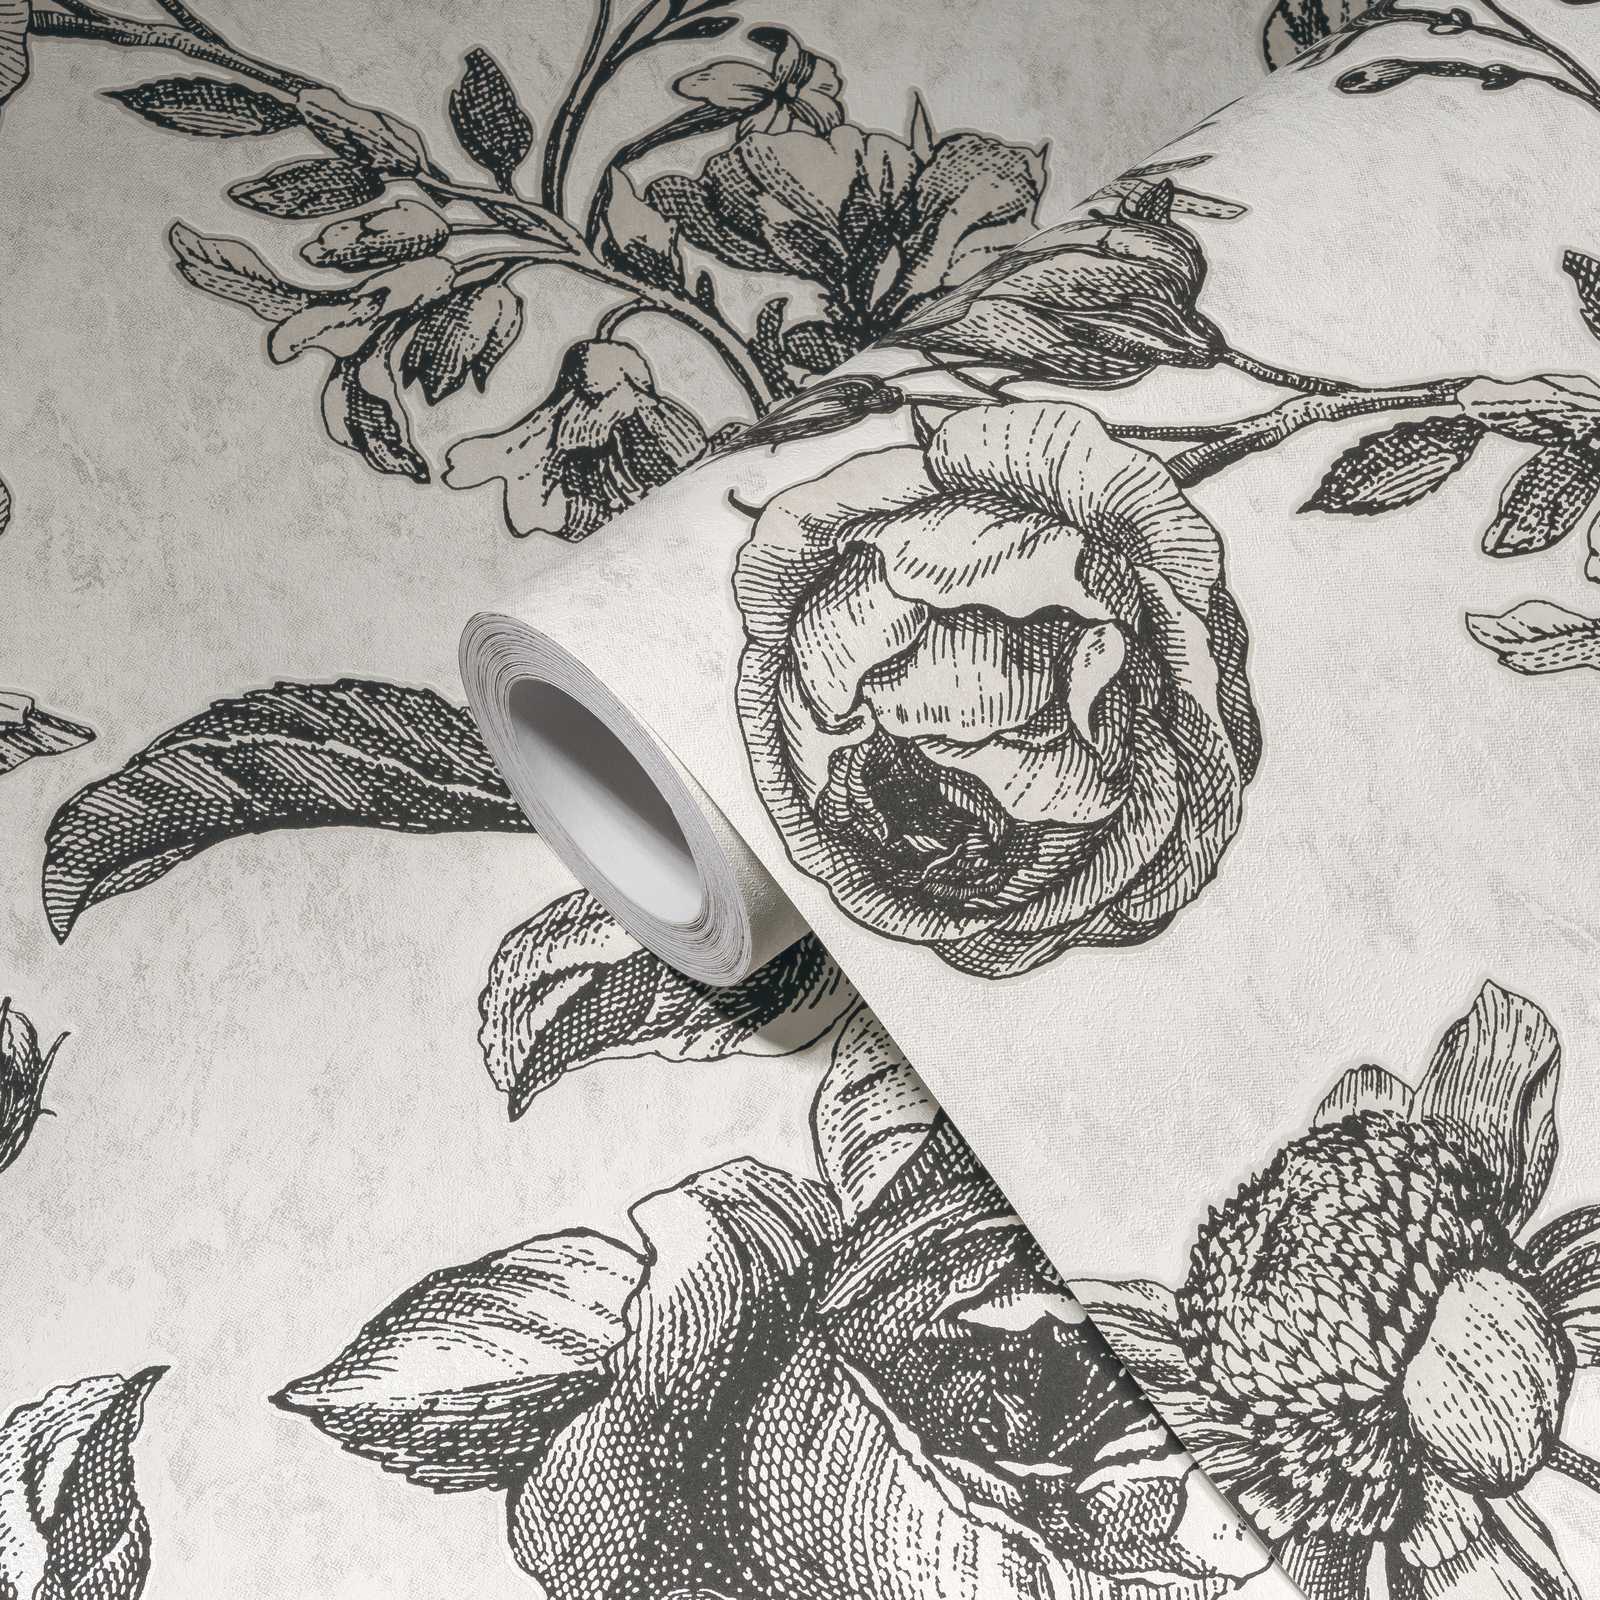             Black and cream wallpaper roses floral pattern - white, black, grey
        